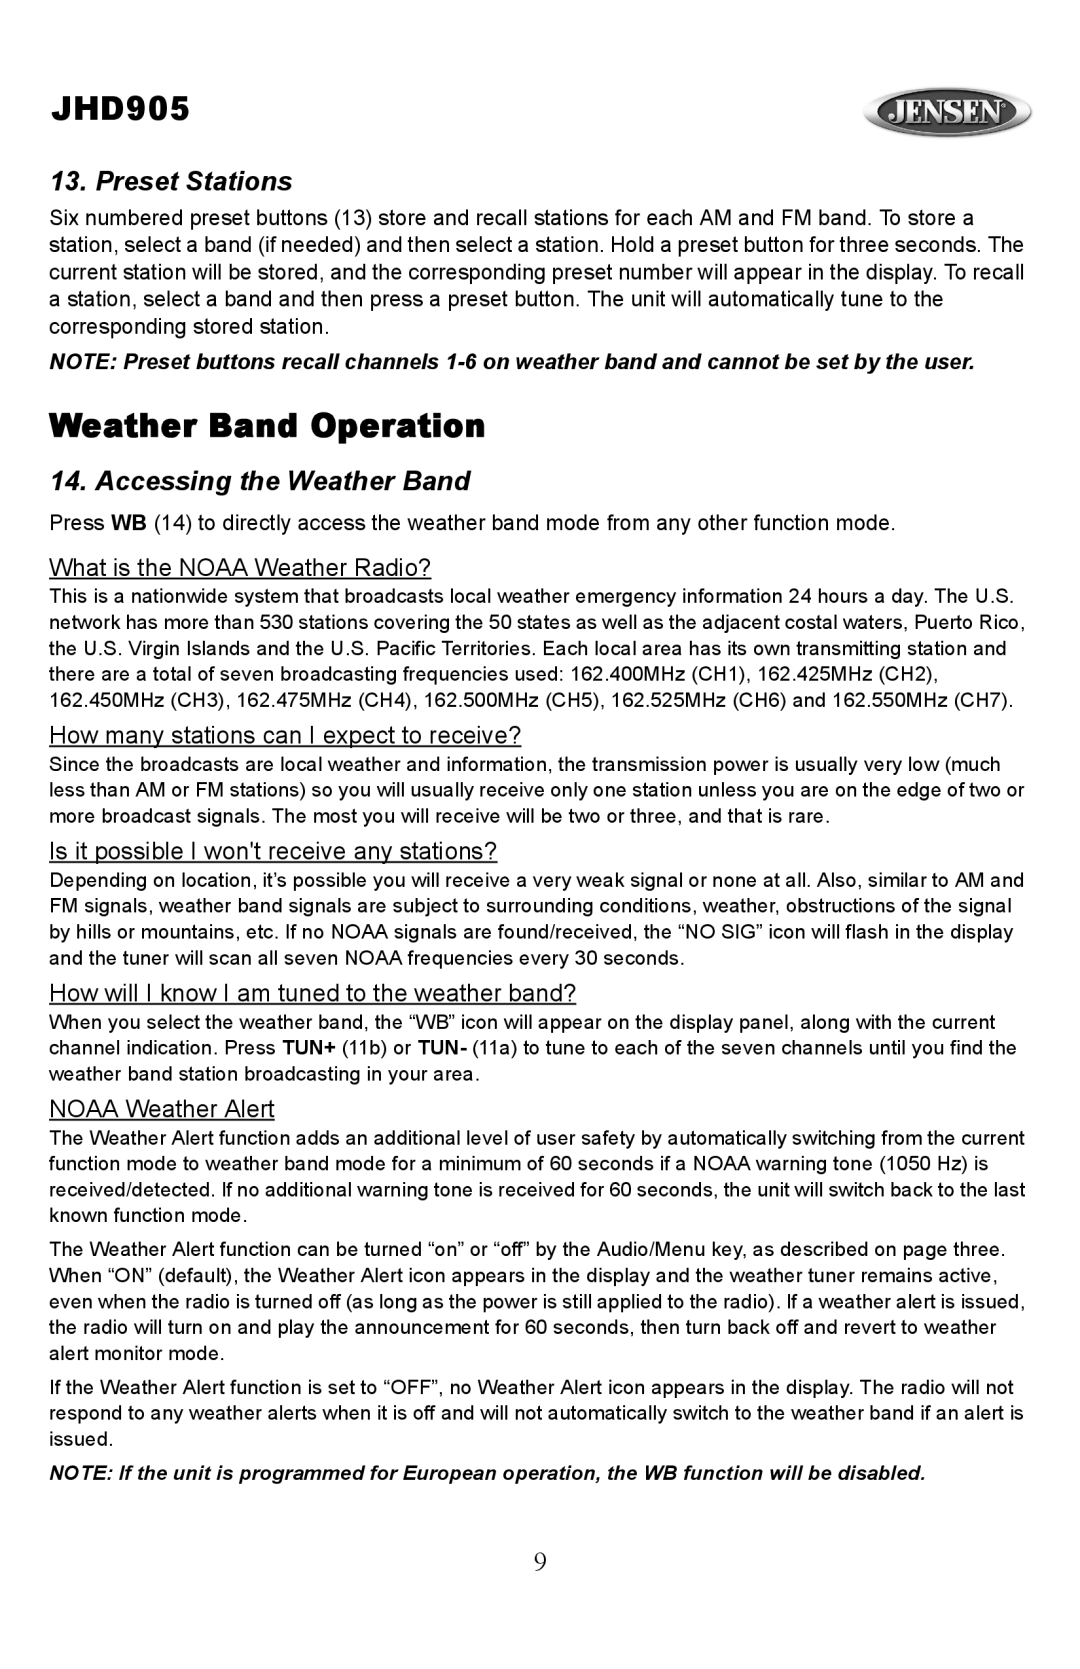 Jensen JHD905 owner manual Weather Band Operation, Preset Stations, Accessing the Weather Band 